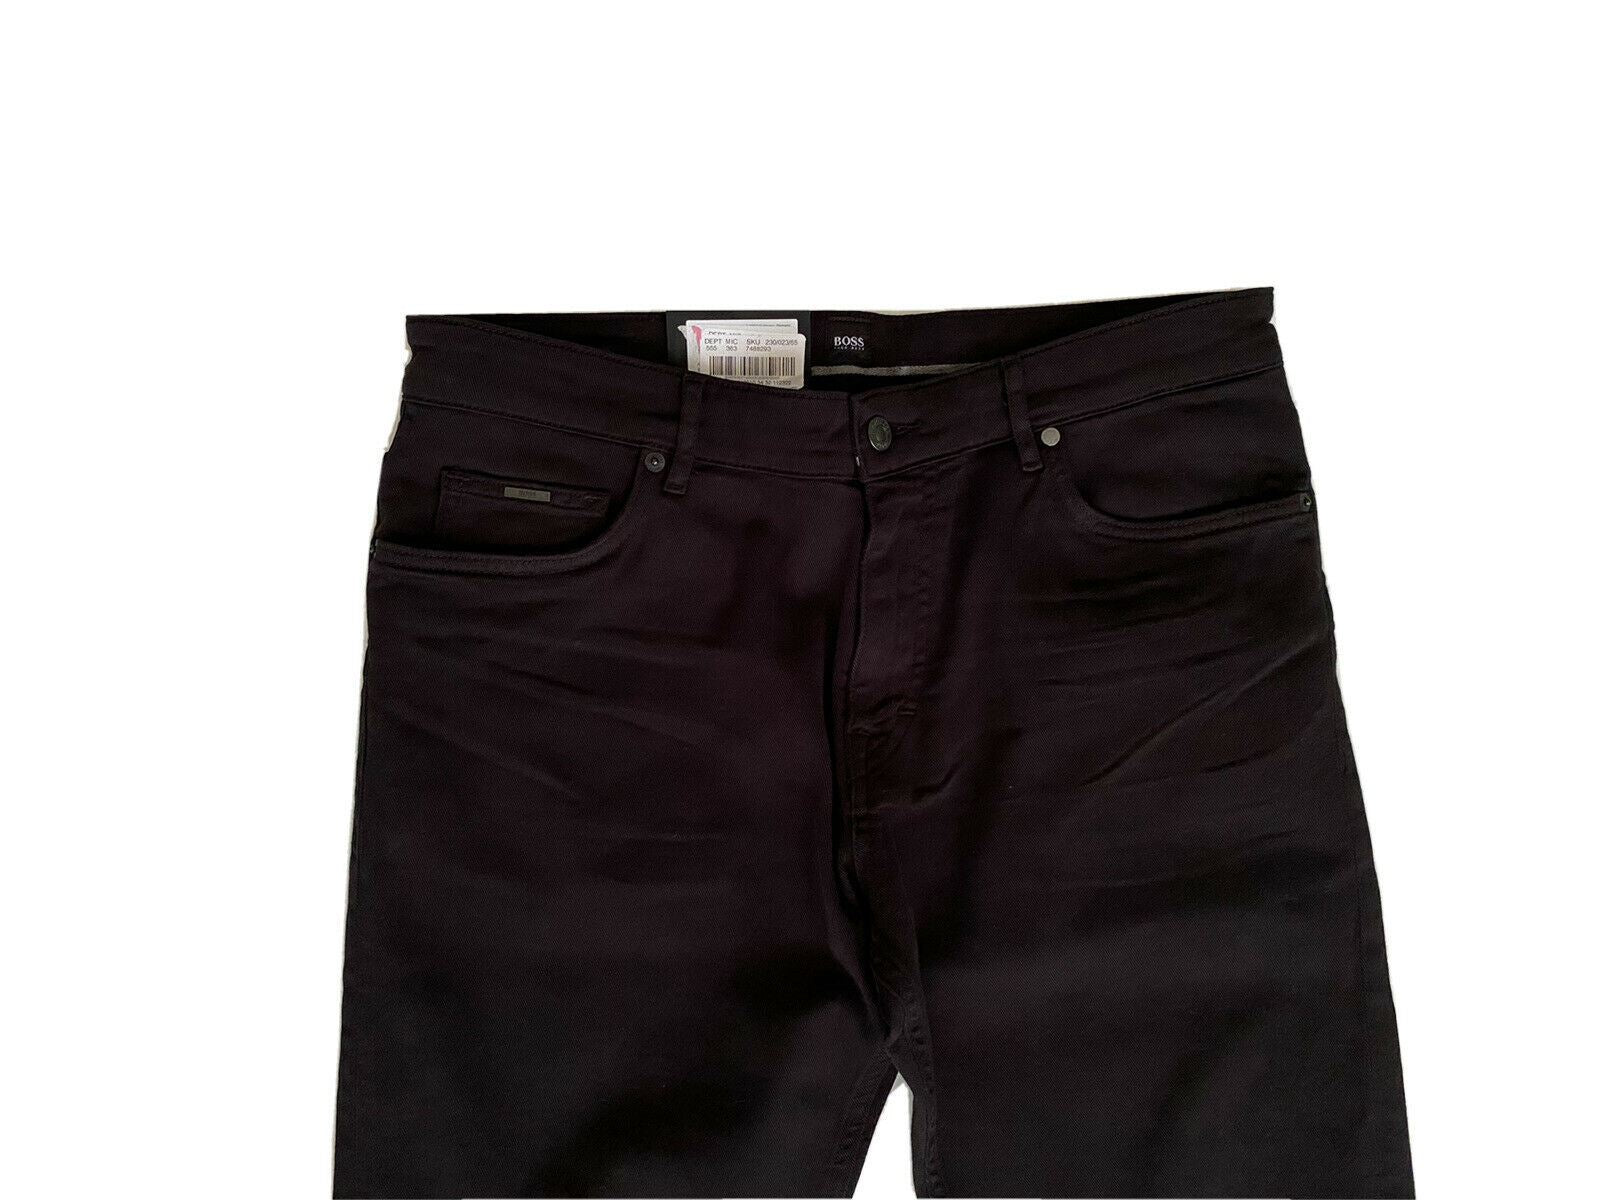 hugo boss albany jeans relaxed fit